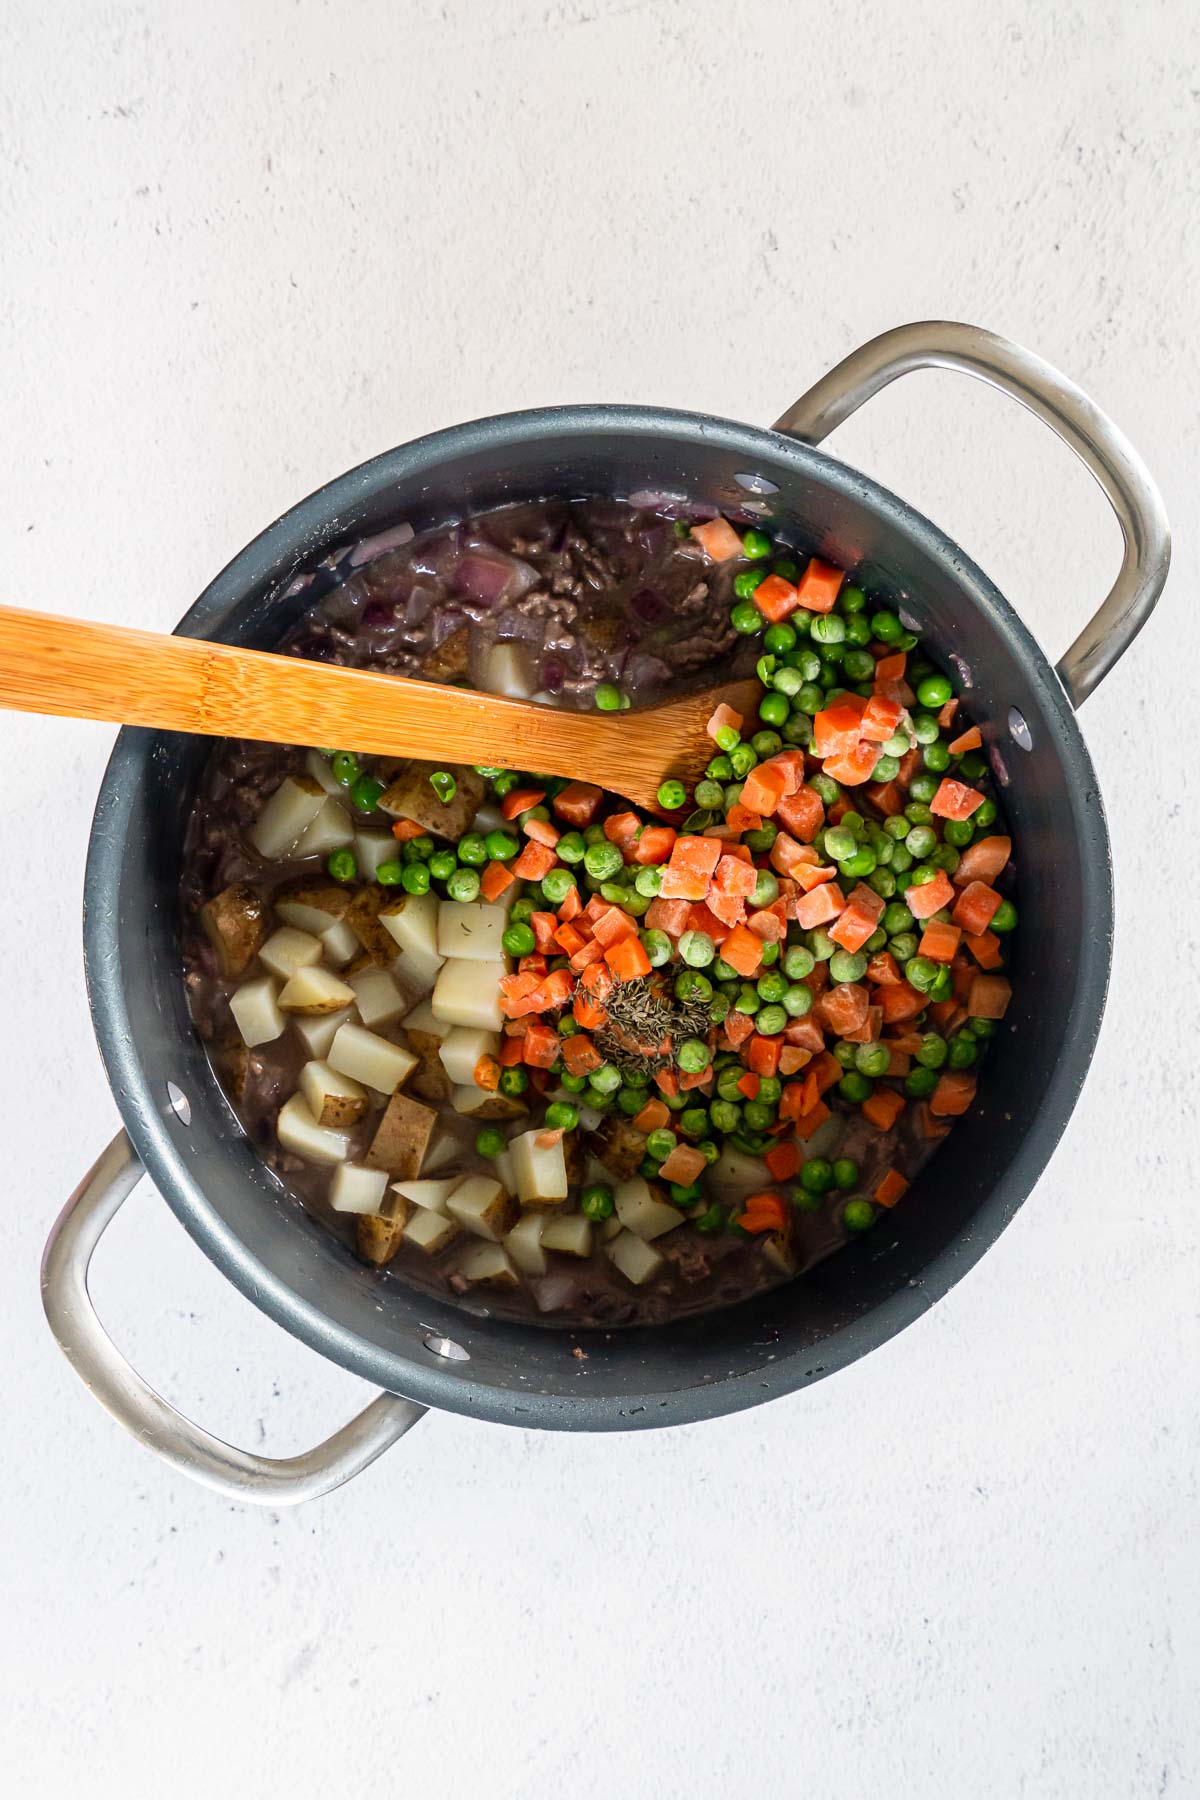 Frozen peas and carrots, diced potatoes, and broth and red wine in a large pot together.